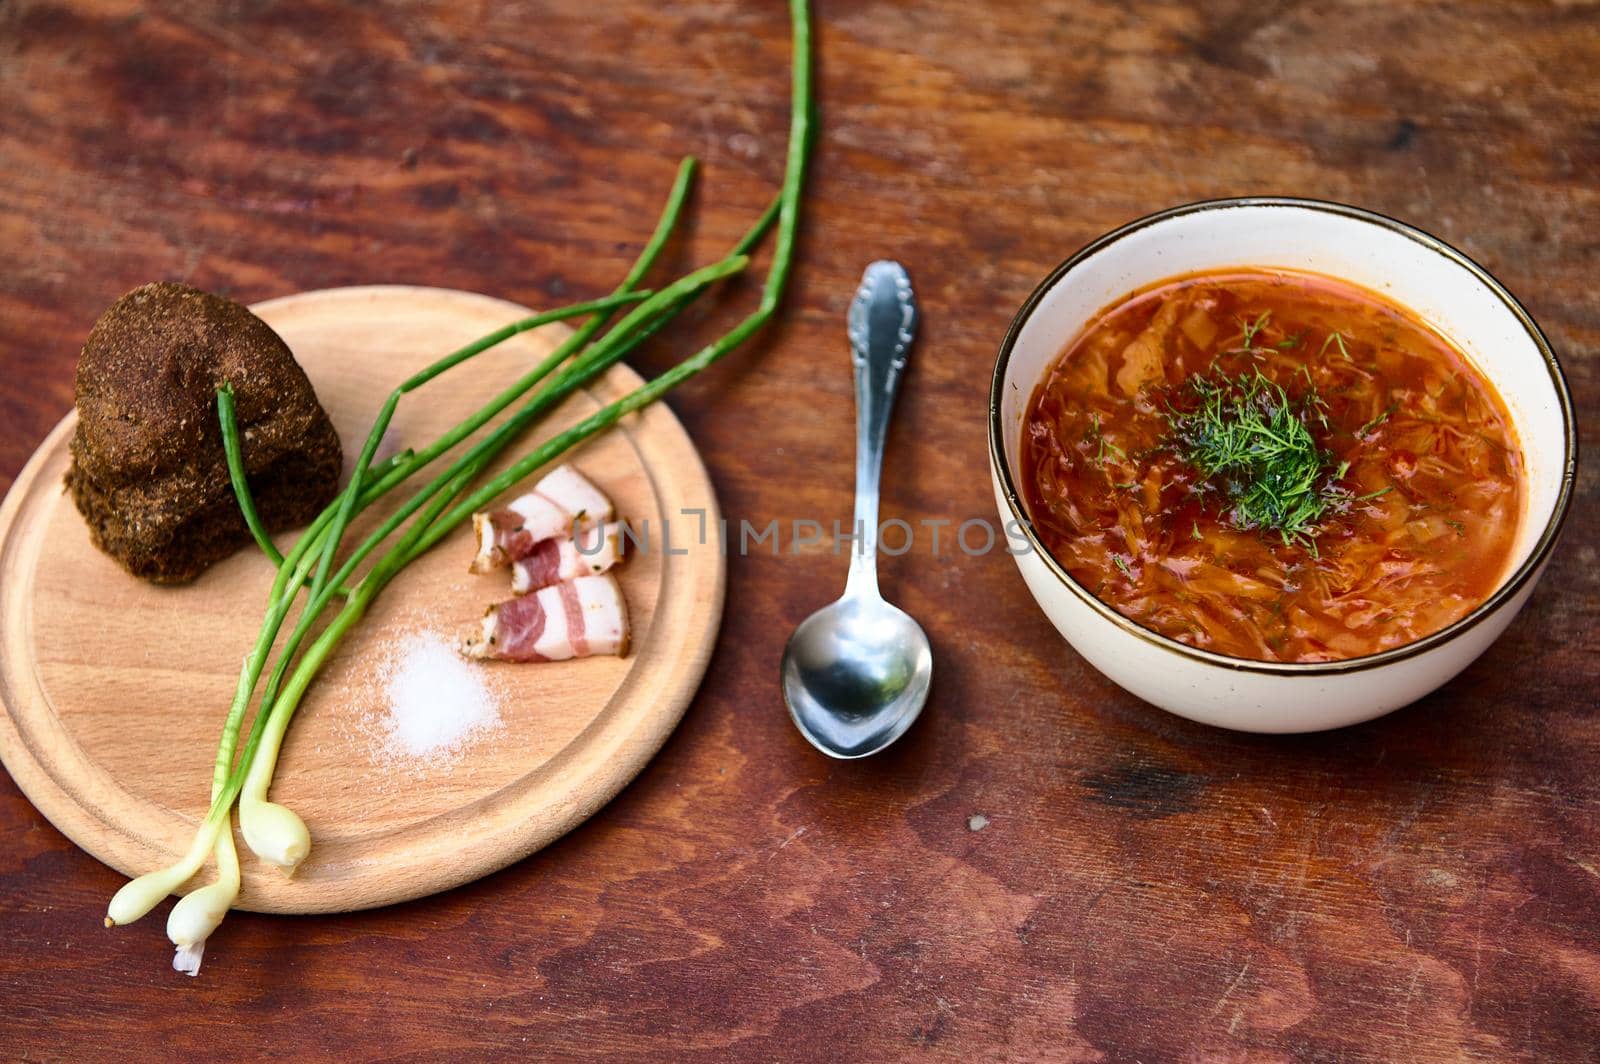 Top view. Bowl of beetroot soup with dill- Ukrainian borscht - and wooden board with green onion, salt, bacon and bread by artgf